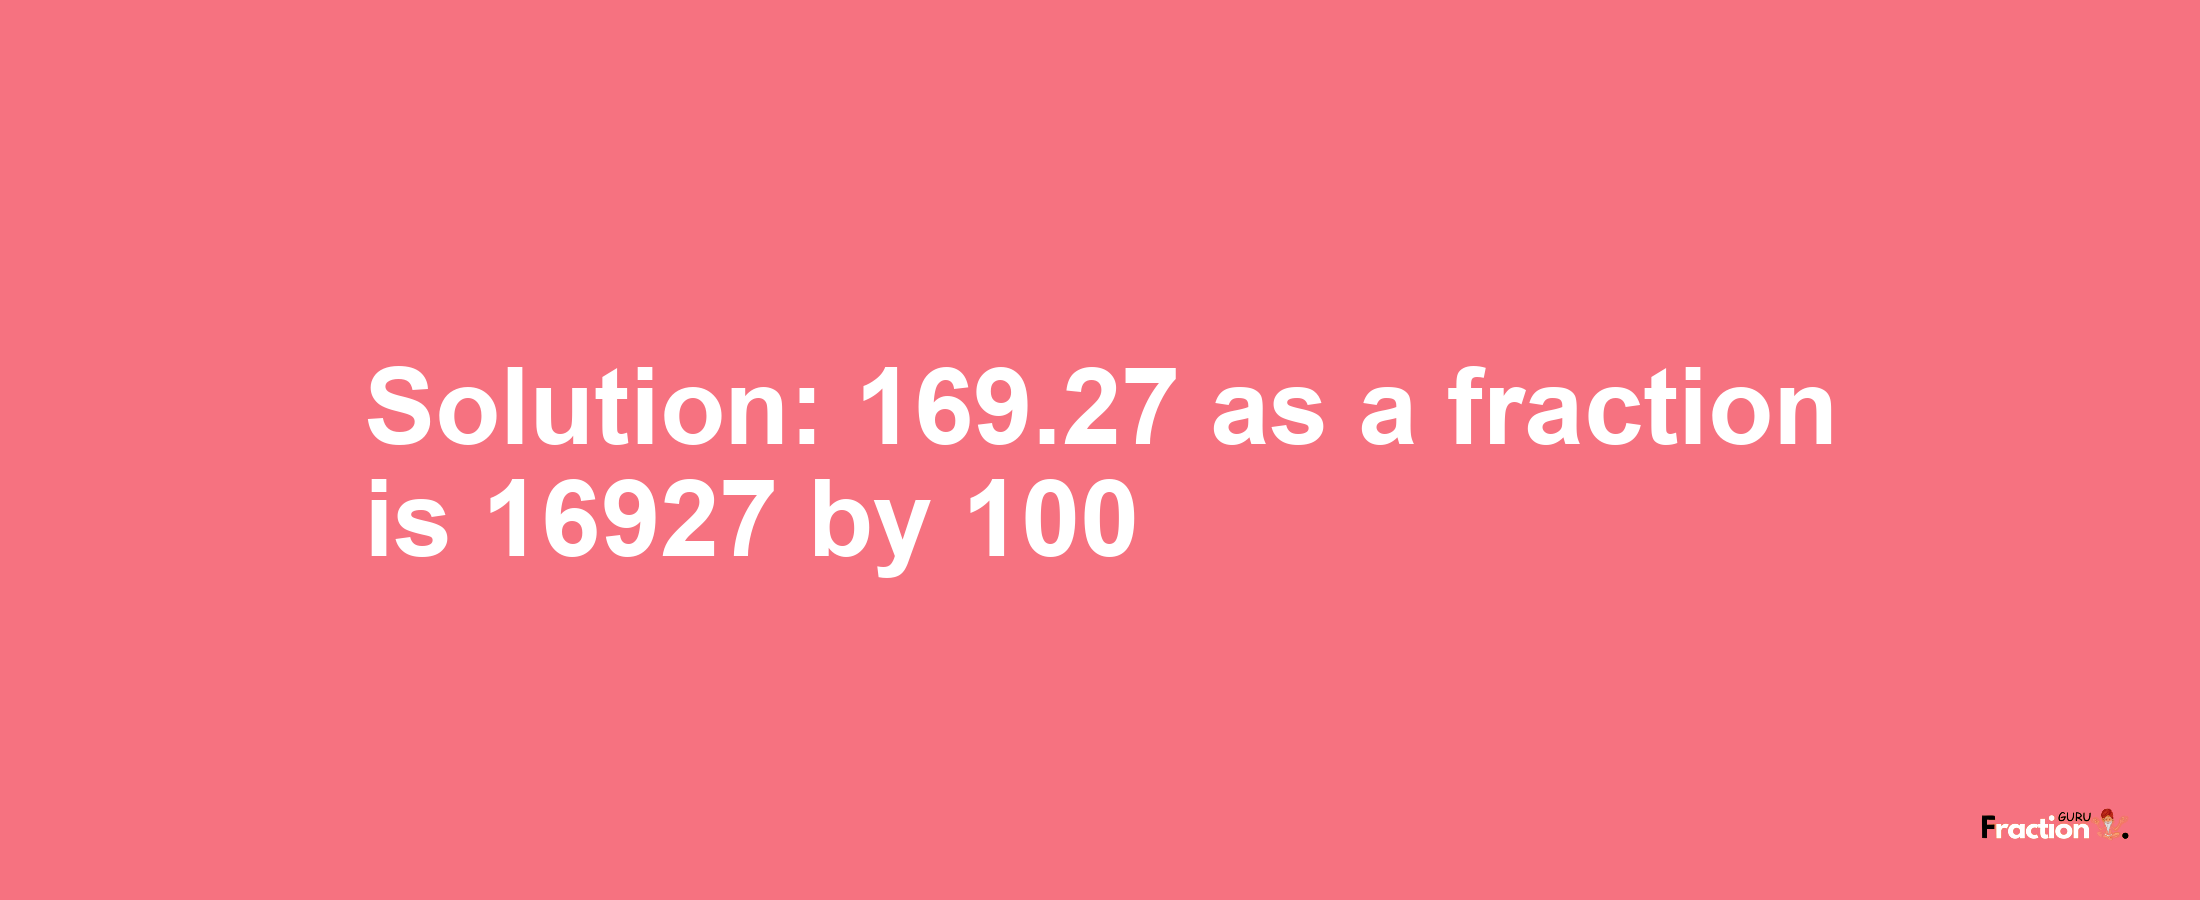 Solution:169.27 as a fraction is 16927/100